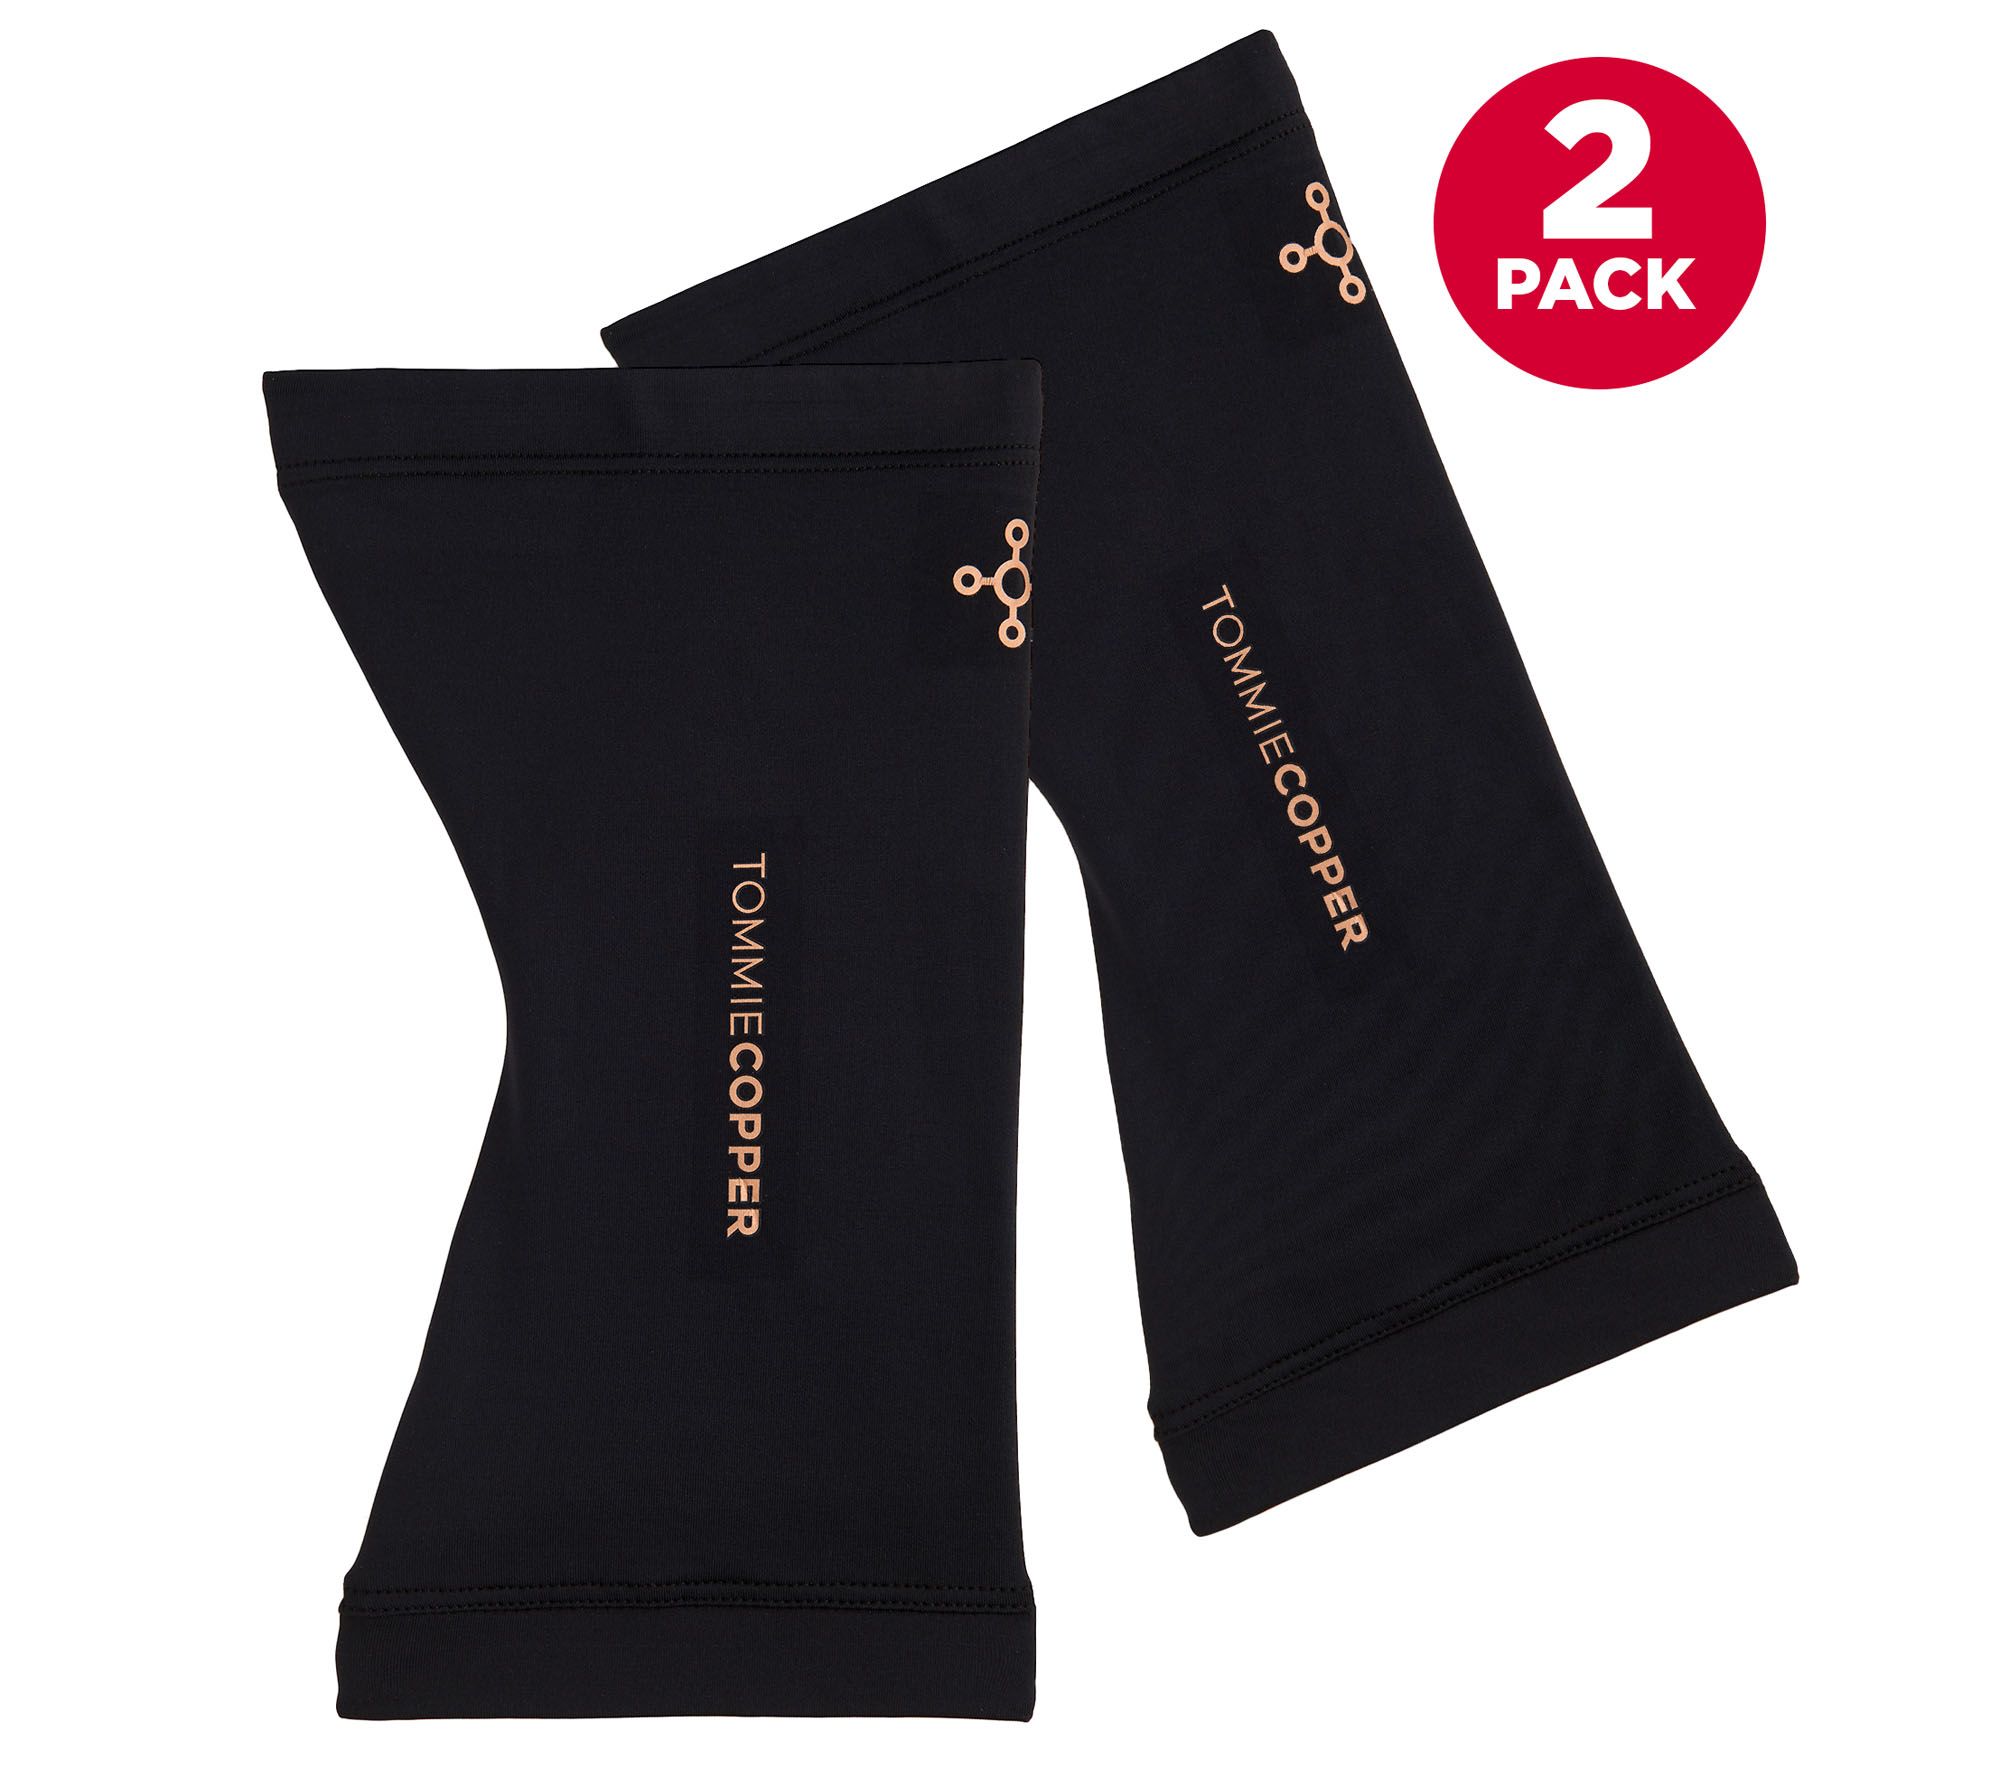 Tommie Copper Core Compression Set of 2 Knee Sleeves 